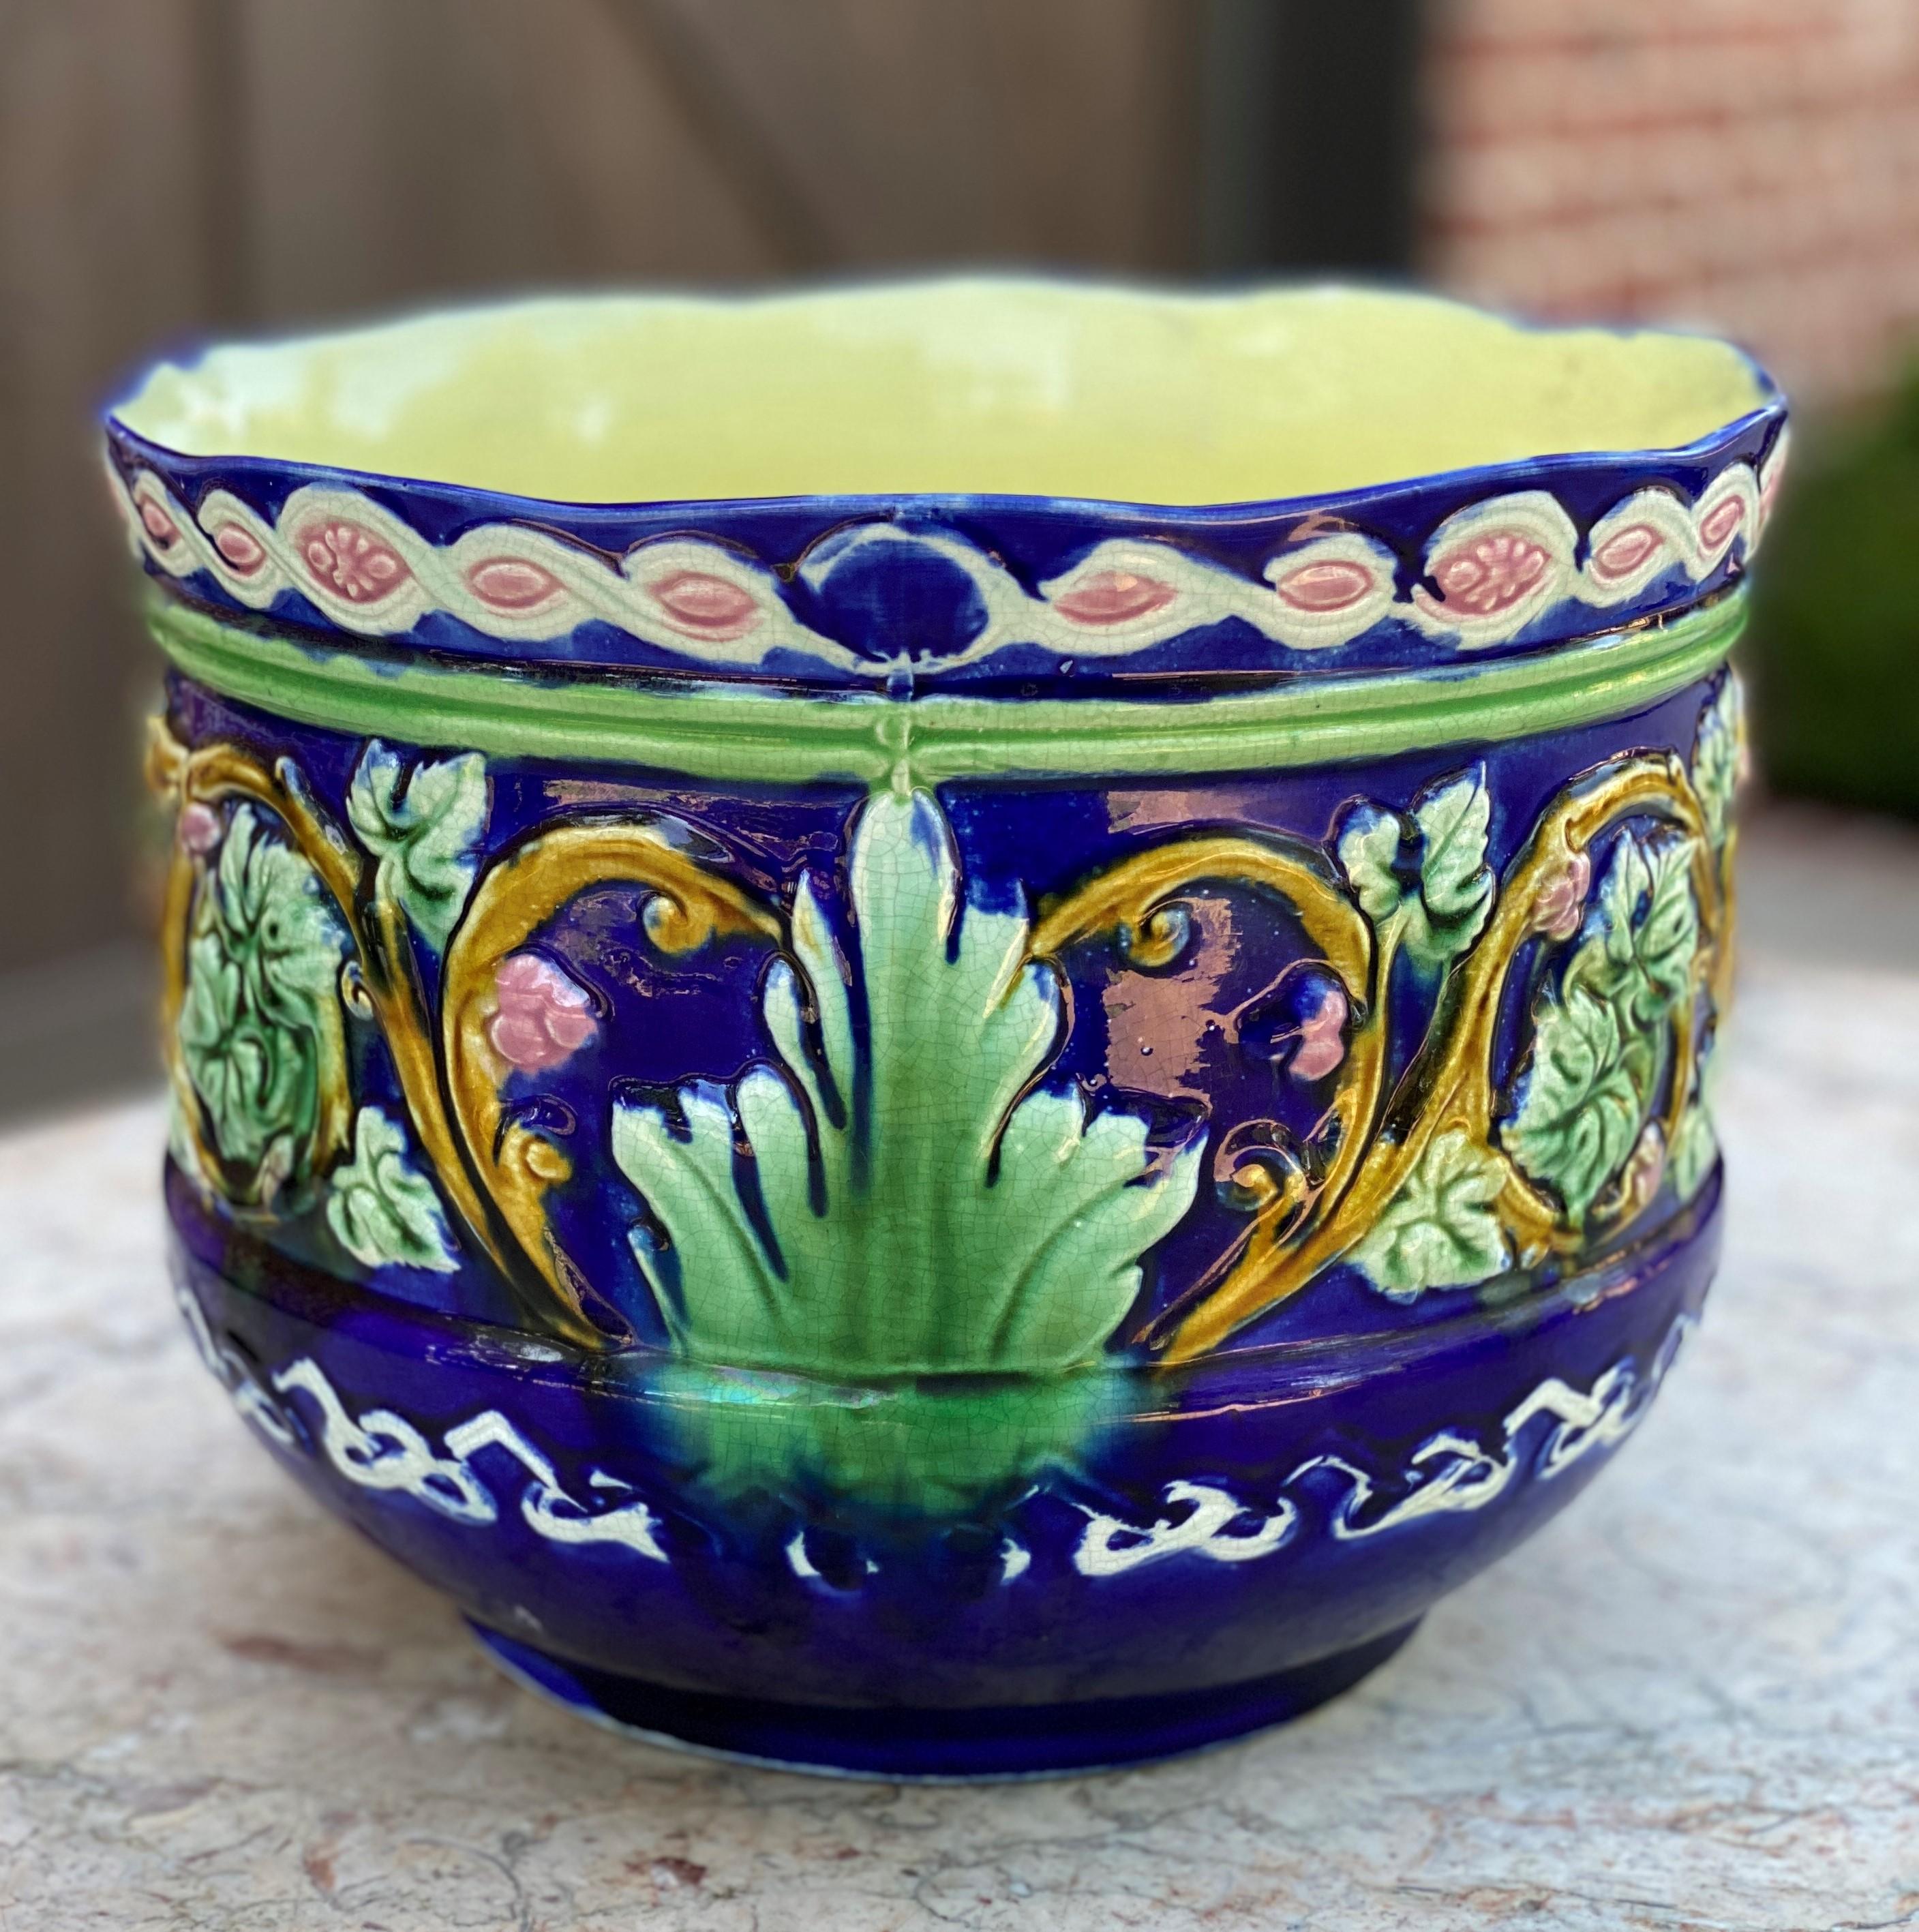 Early 20th Century Antique French Majolica Planter Cache Pot Jardiniere Vase Bowl Blue Floral Large